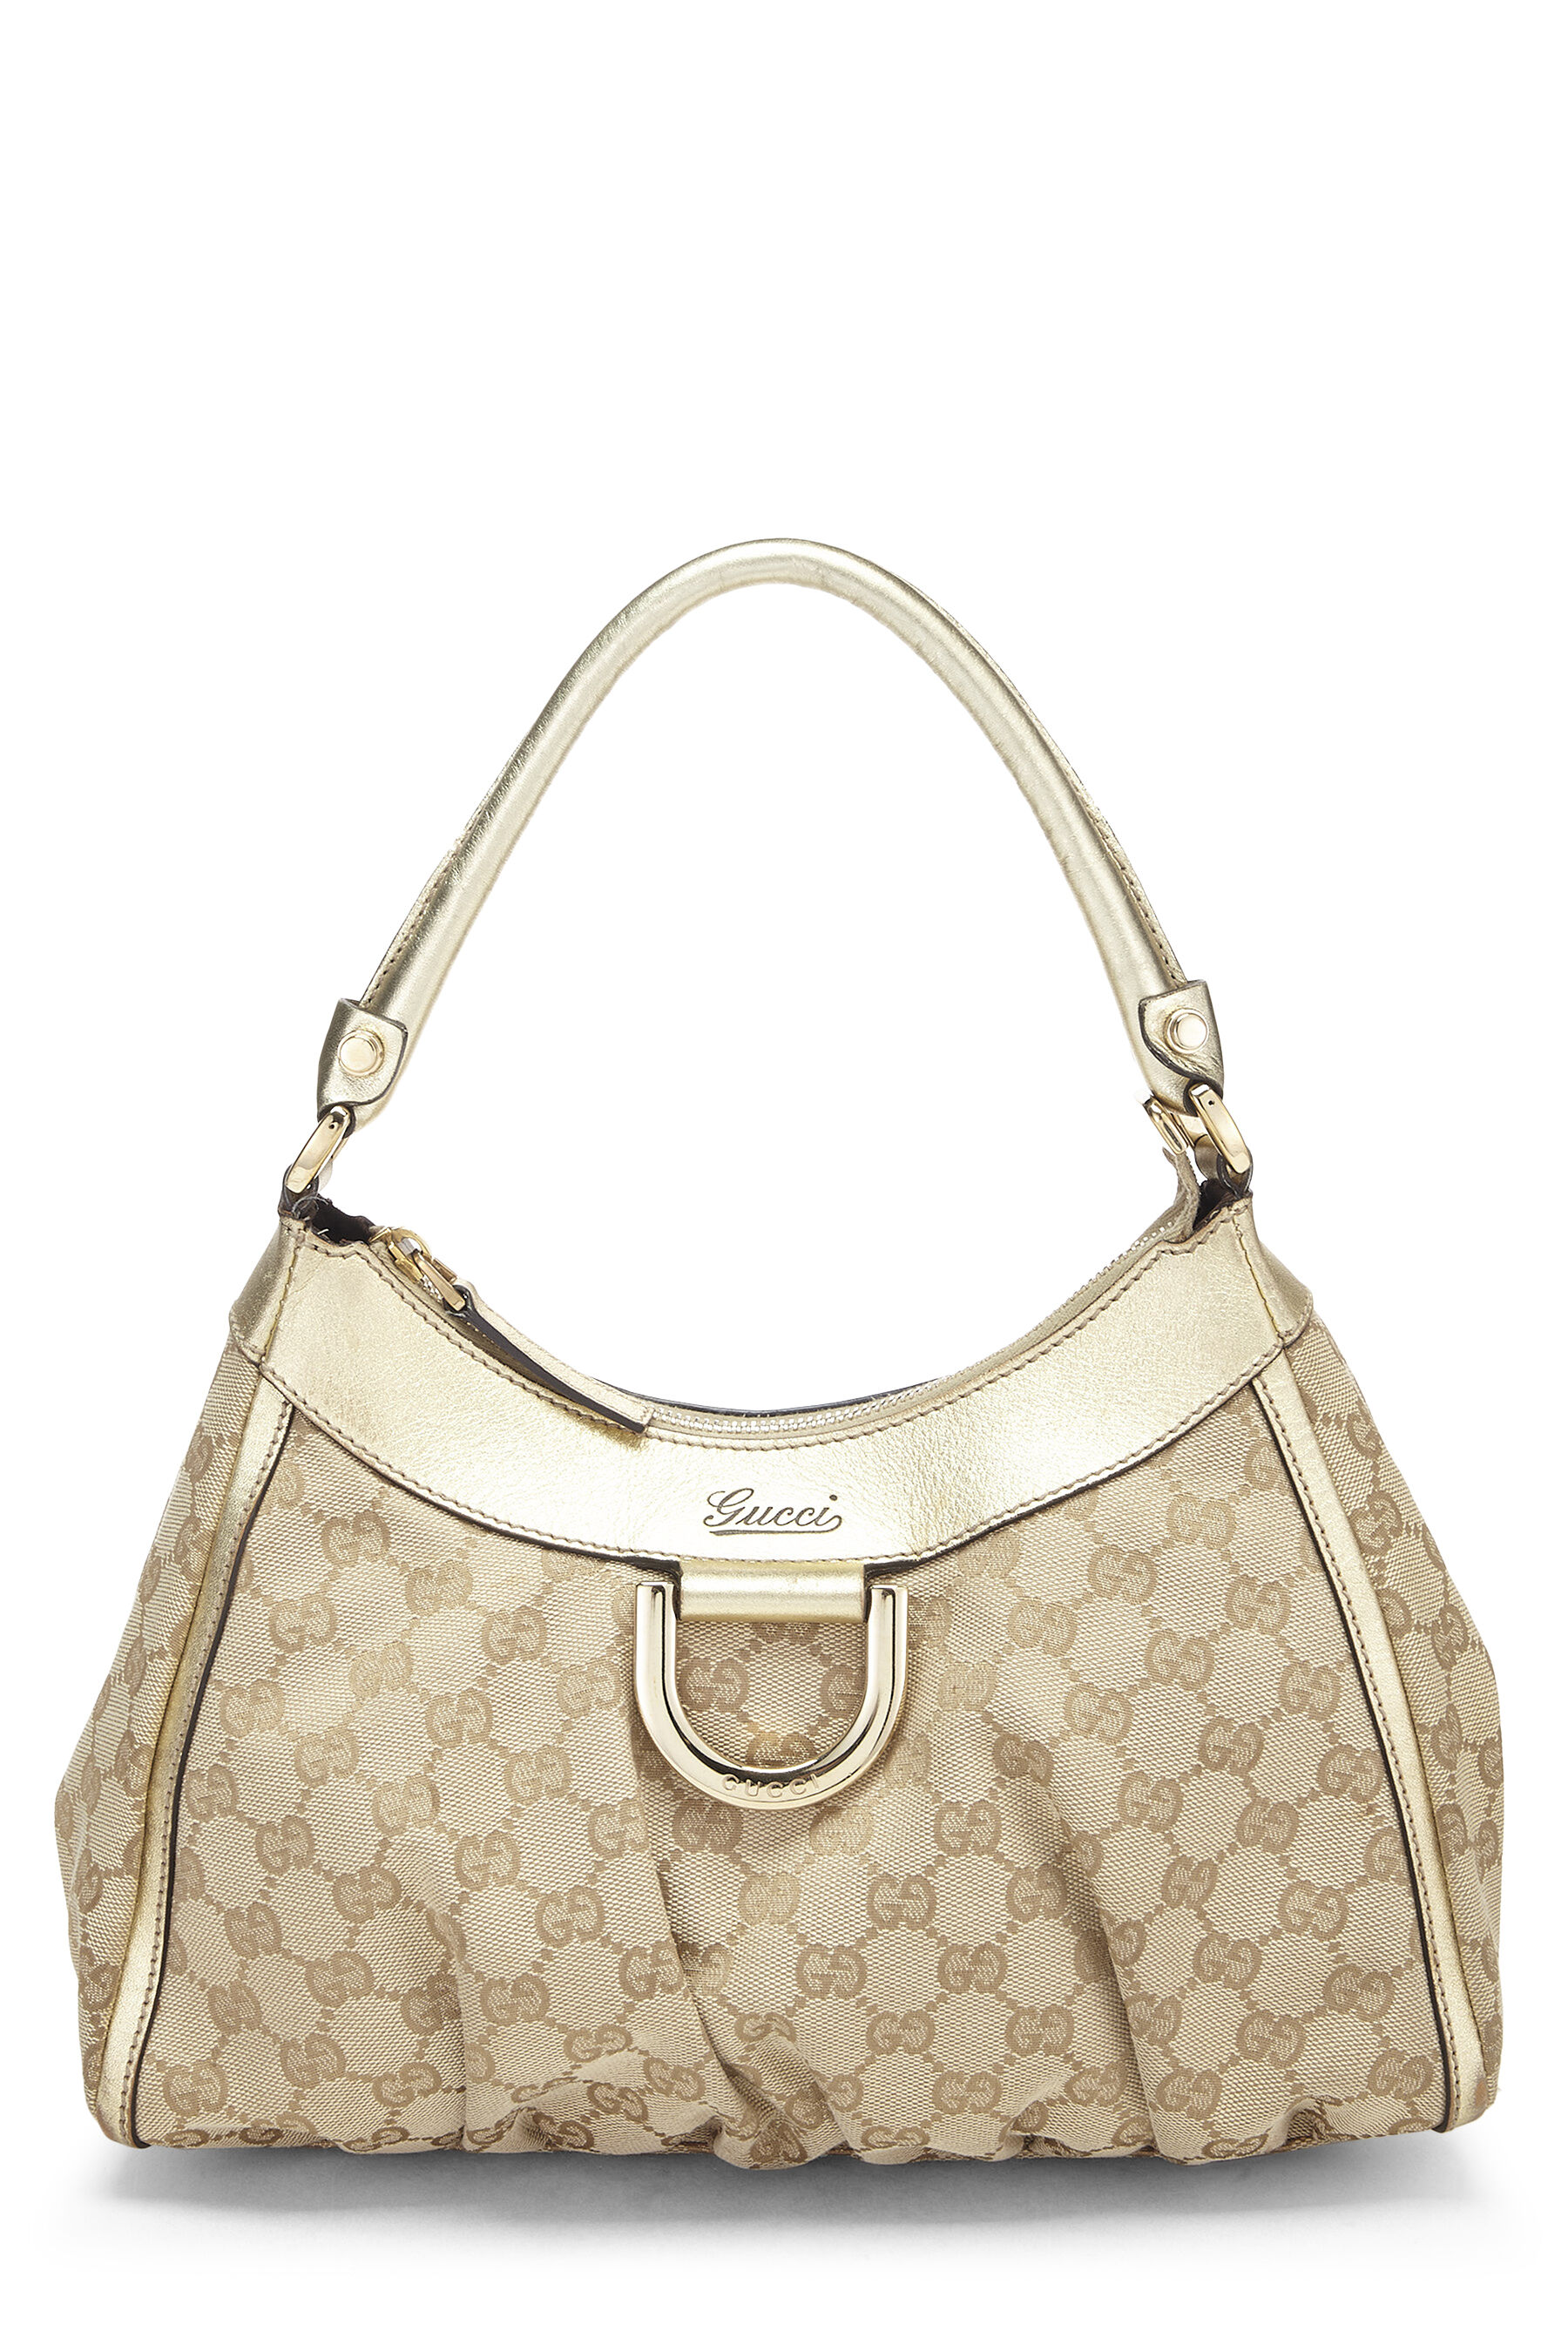 Gucci Brown Suede Small GG Ring Shoulder Bag Gold Hardware Available For  Immediate Sale At Sotheby's